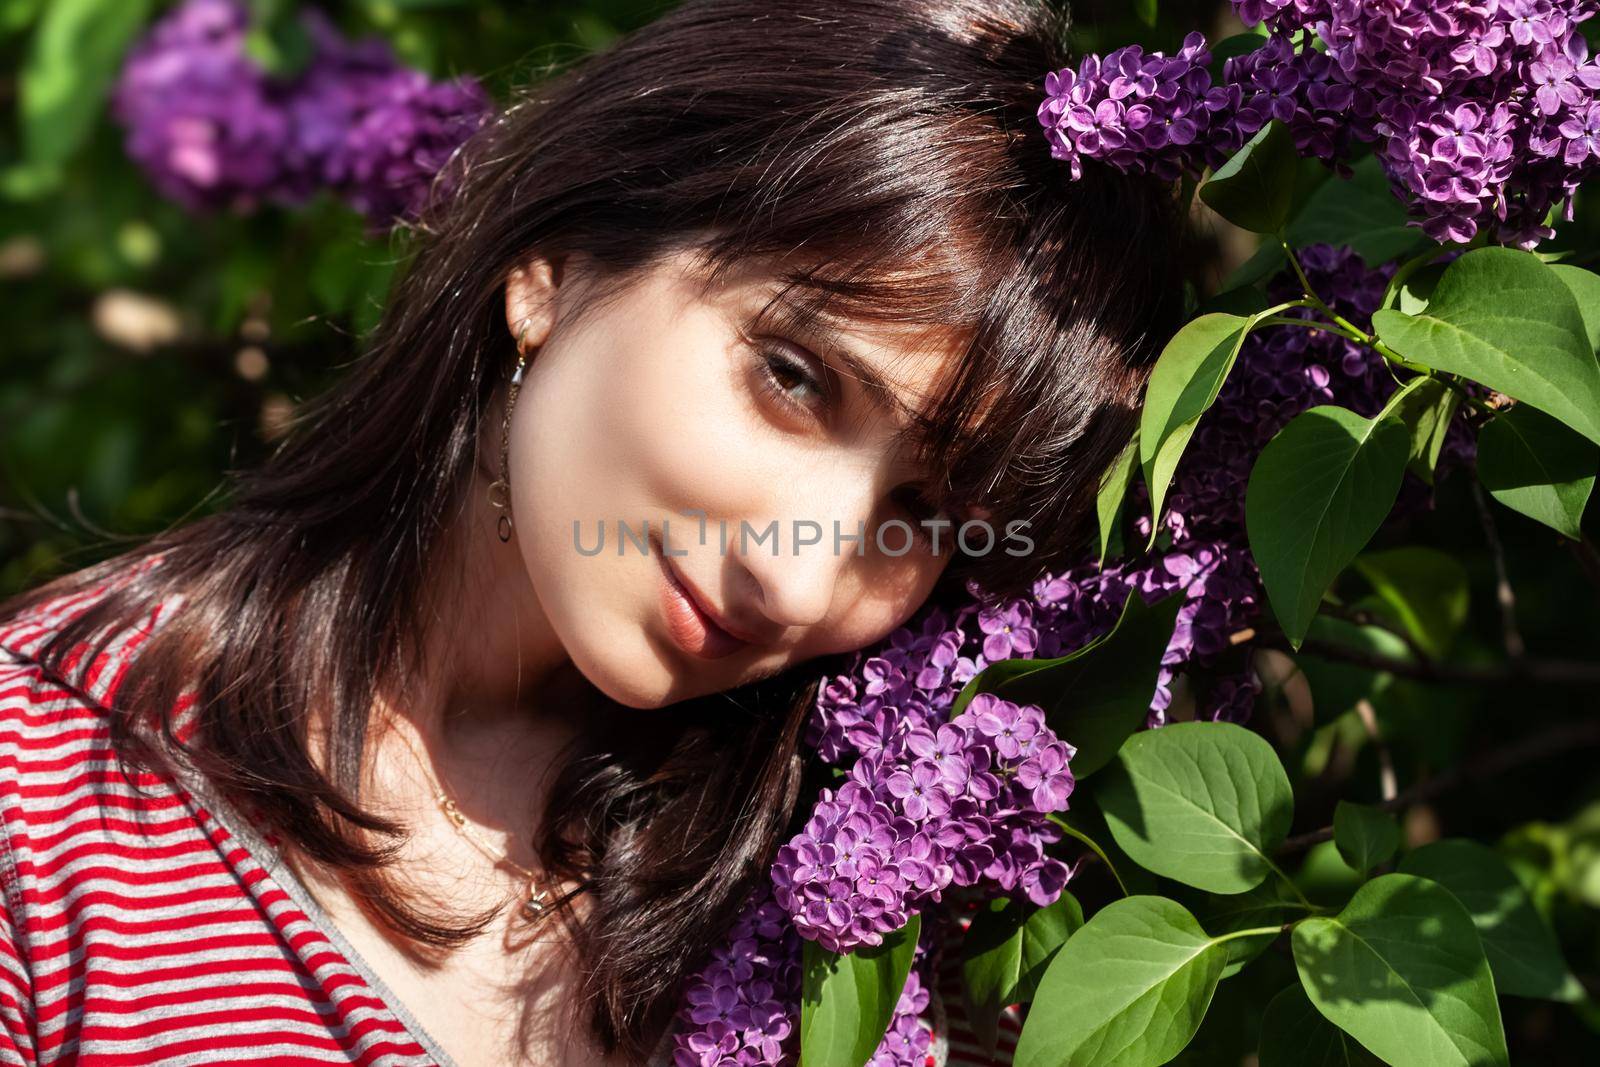 Portrait of a young beautiful woman posing among blooming lilacs. Woman among blossoming lilac bushes in spring.